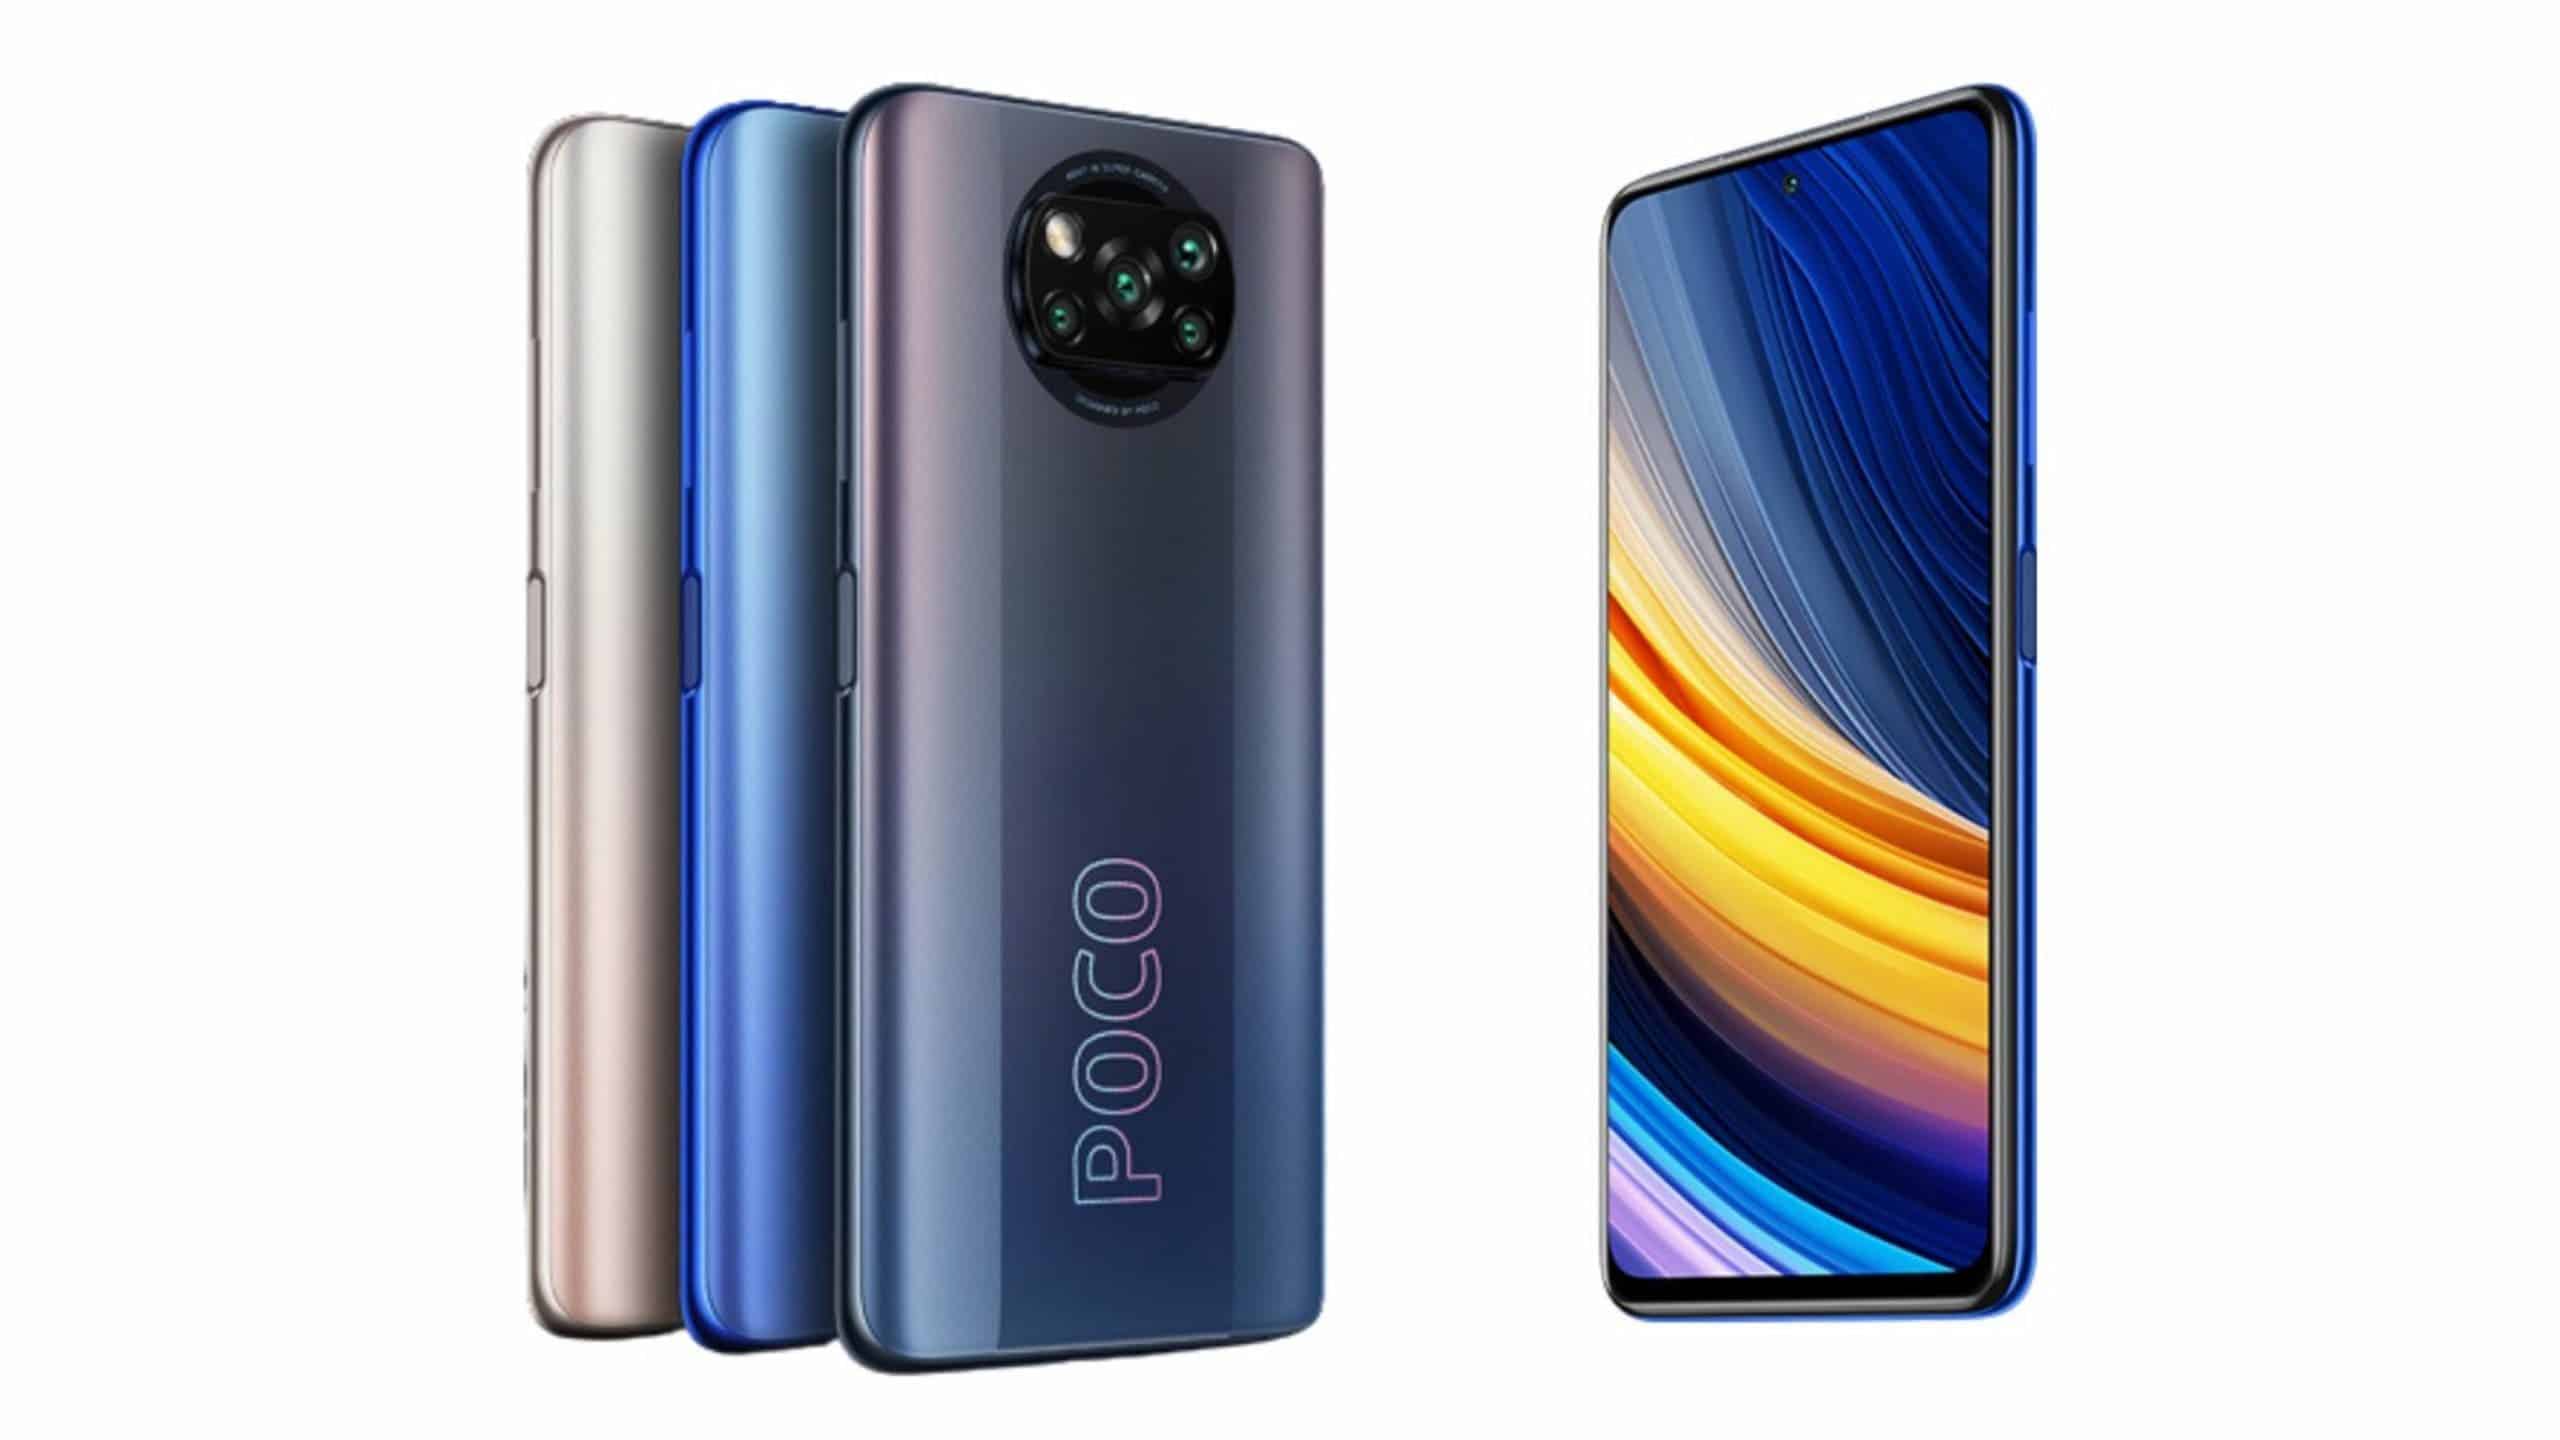 POCO X3 Pro Announced With Snapdragon 860: Starts At $297